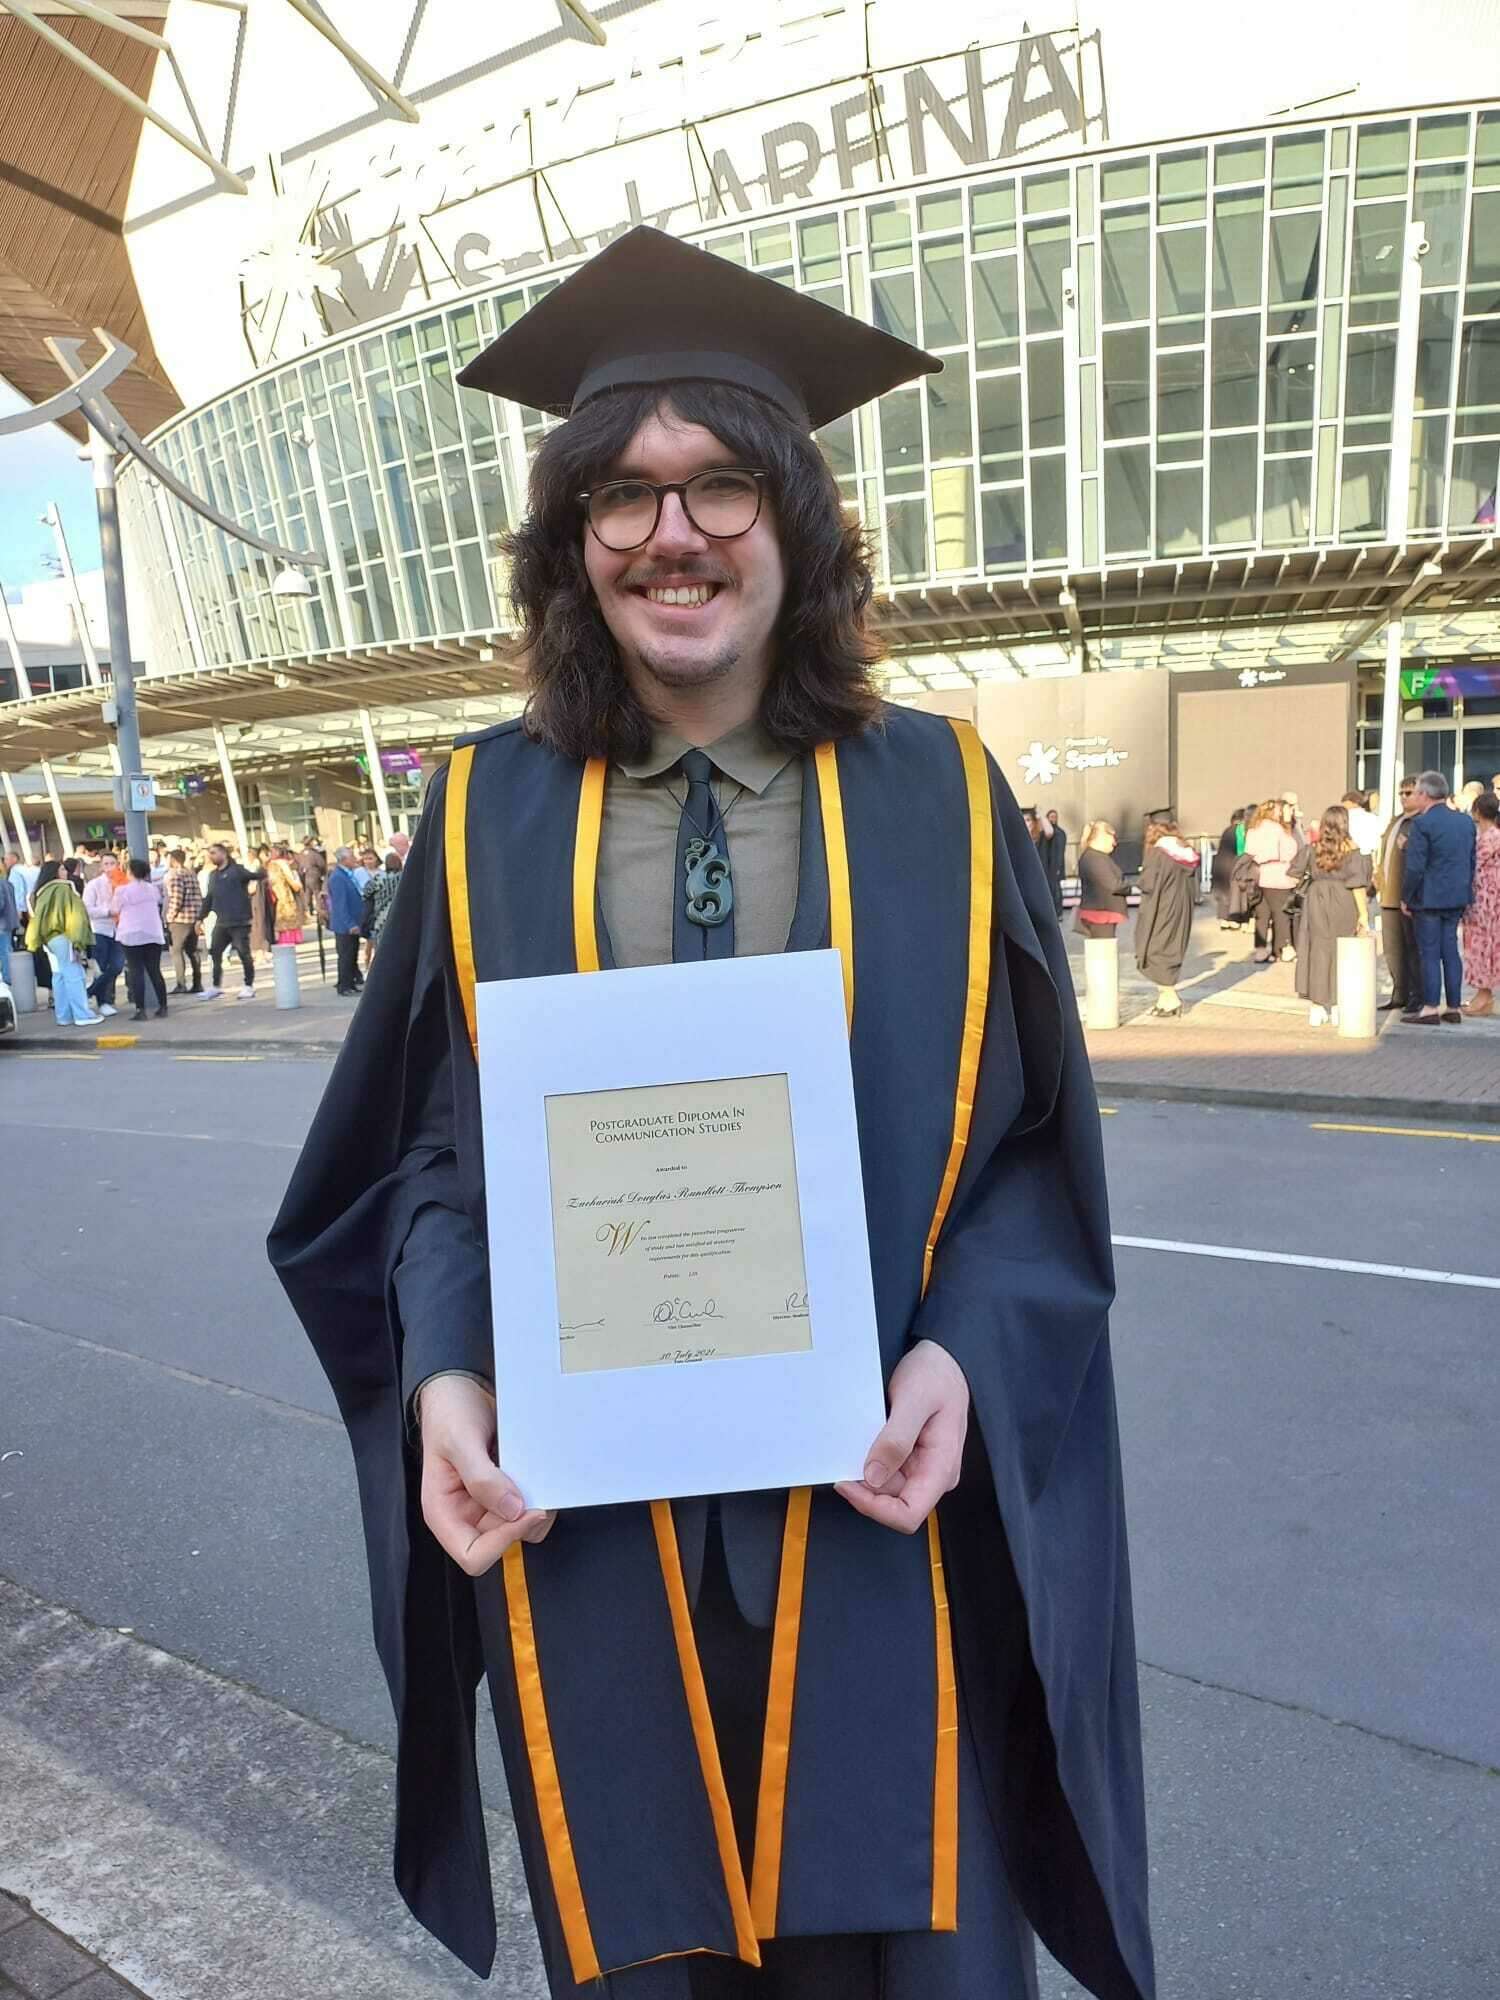 Photo shows Zach graduating as he stands in front of Spark Arena in Auckland. he is wearing his graduation robes and holds his certificate proudly smiling at the camera. He has long wavy brown hair and glasses.